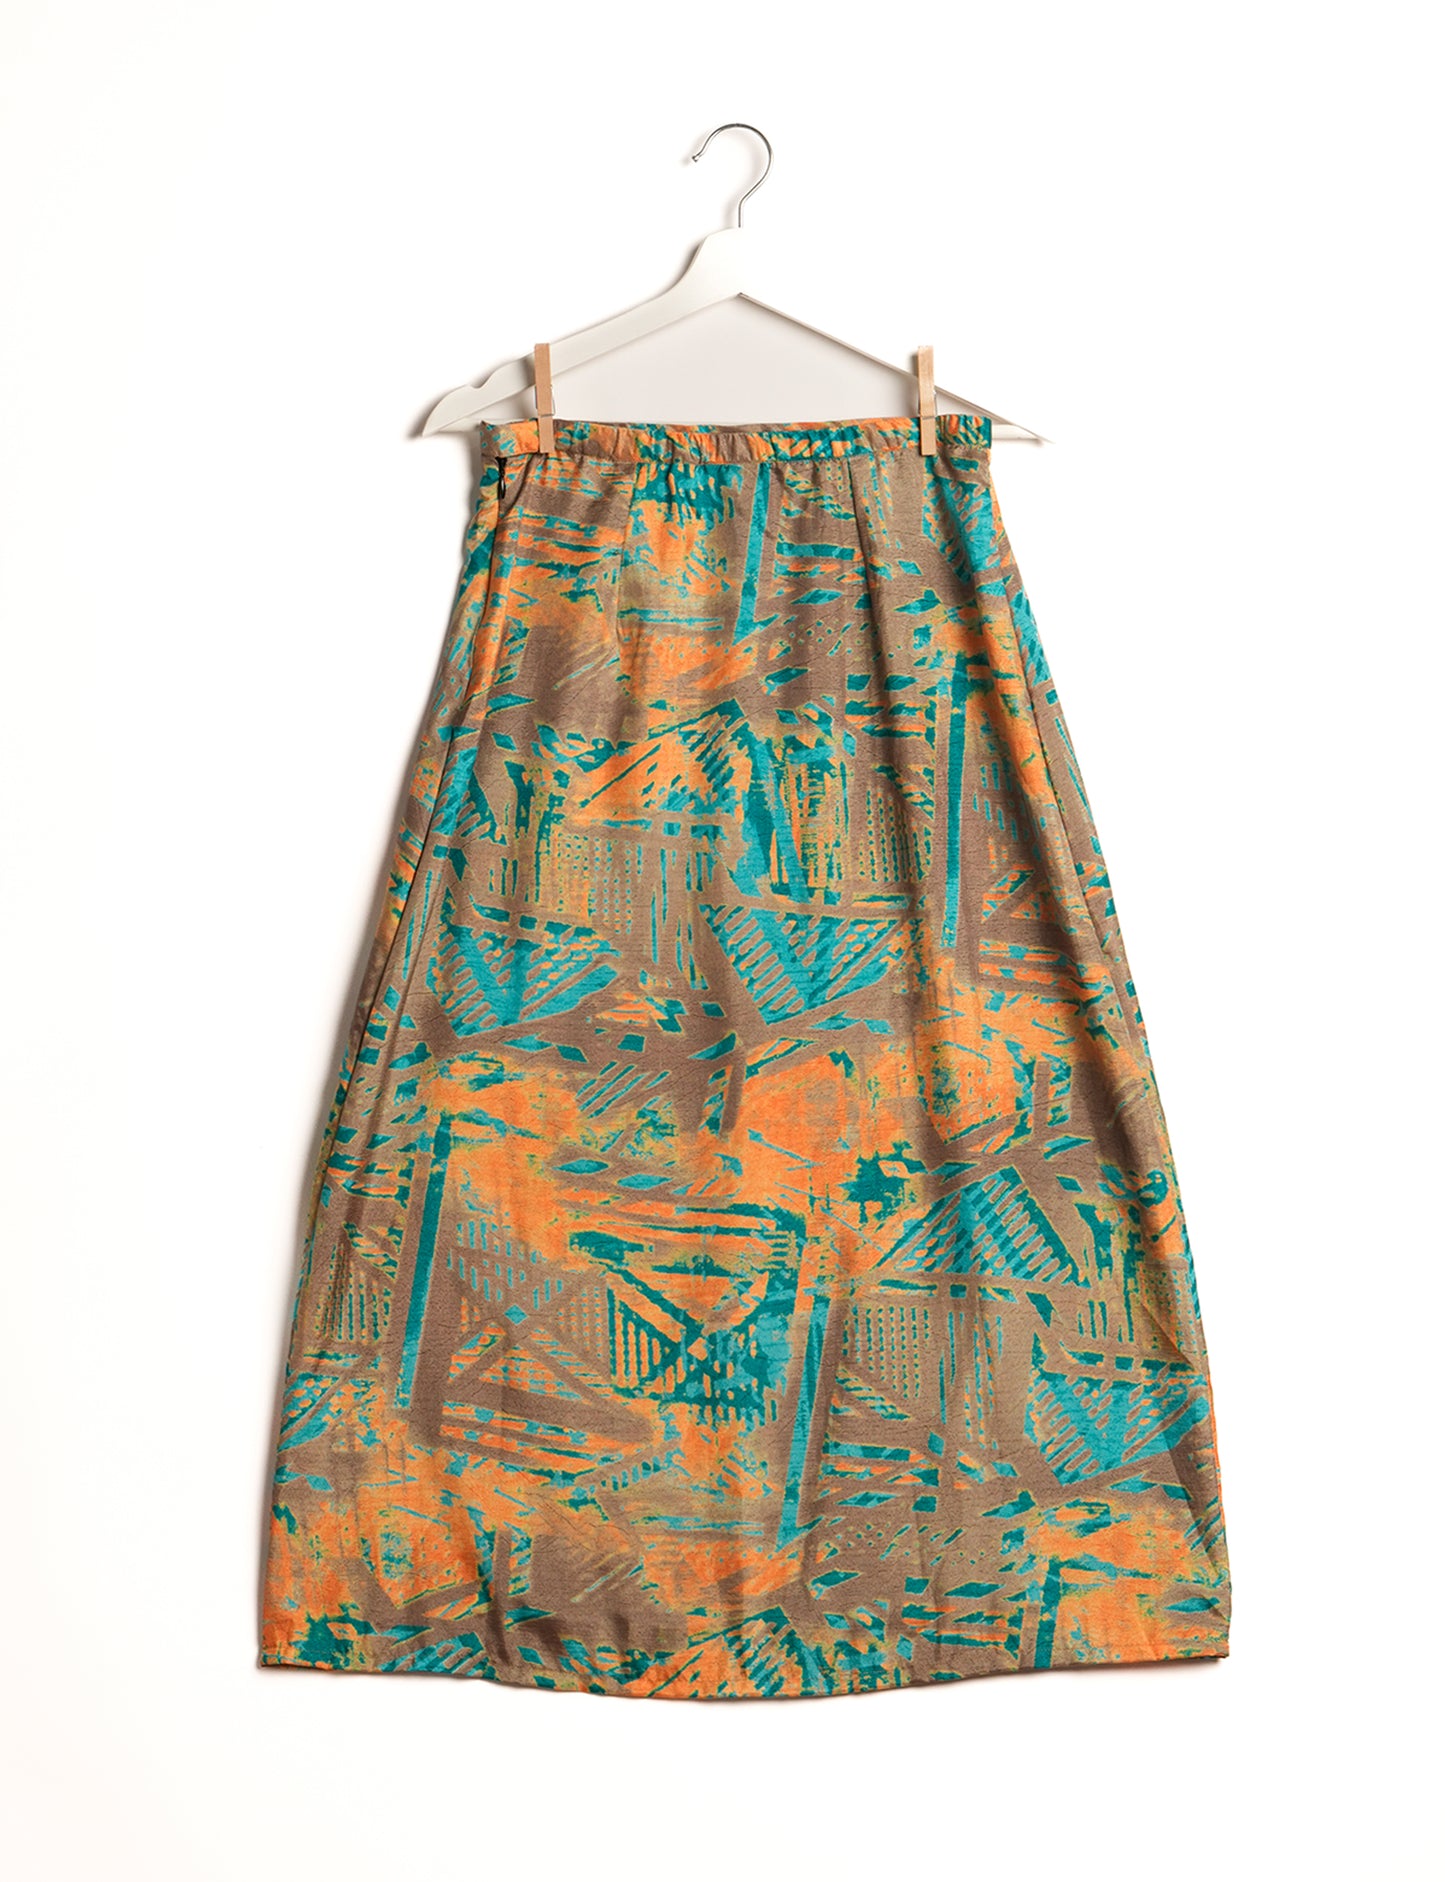 Sustainable A LINE SKIRT, a high-fashion choice for conscious individuals. Fitted at the waist, ankle-length, and ethically crafted for eco-friendly style.